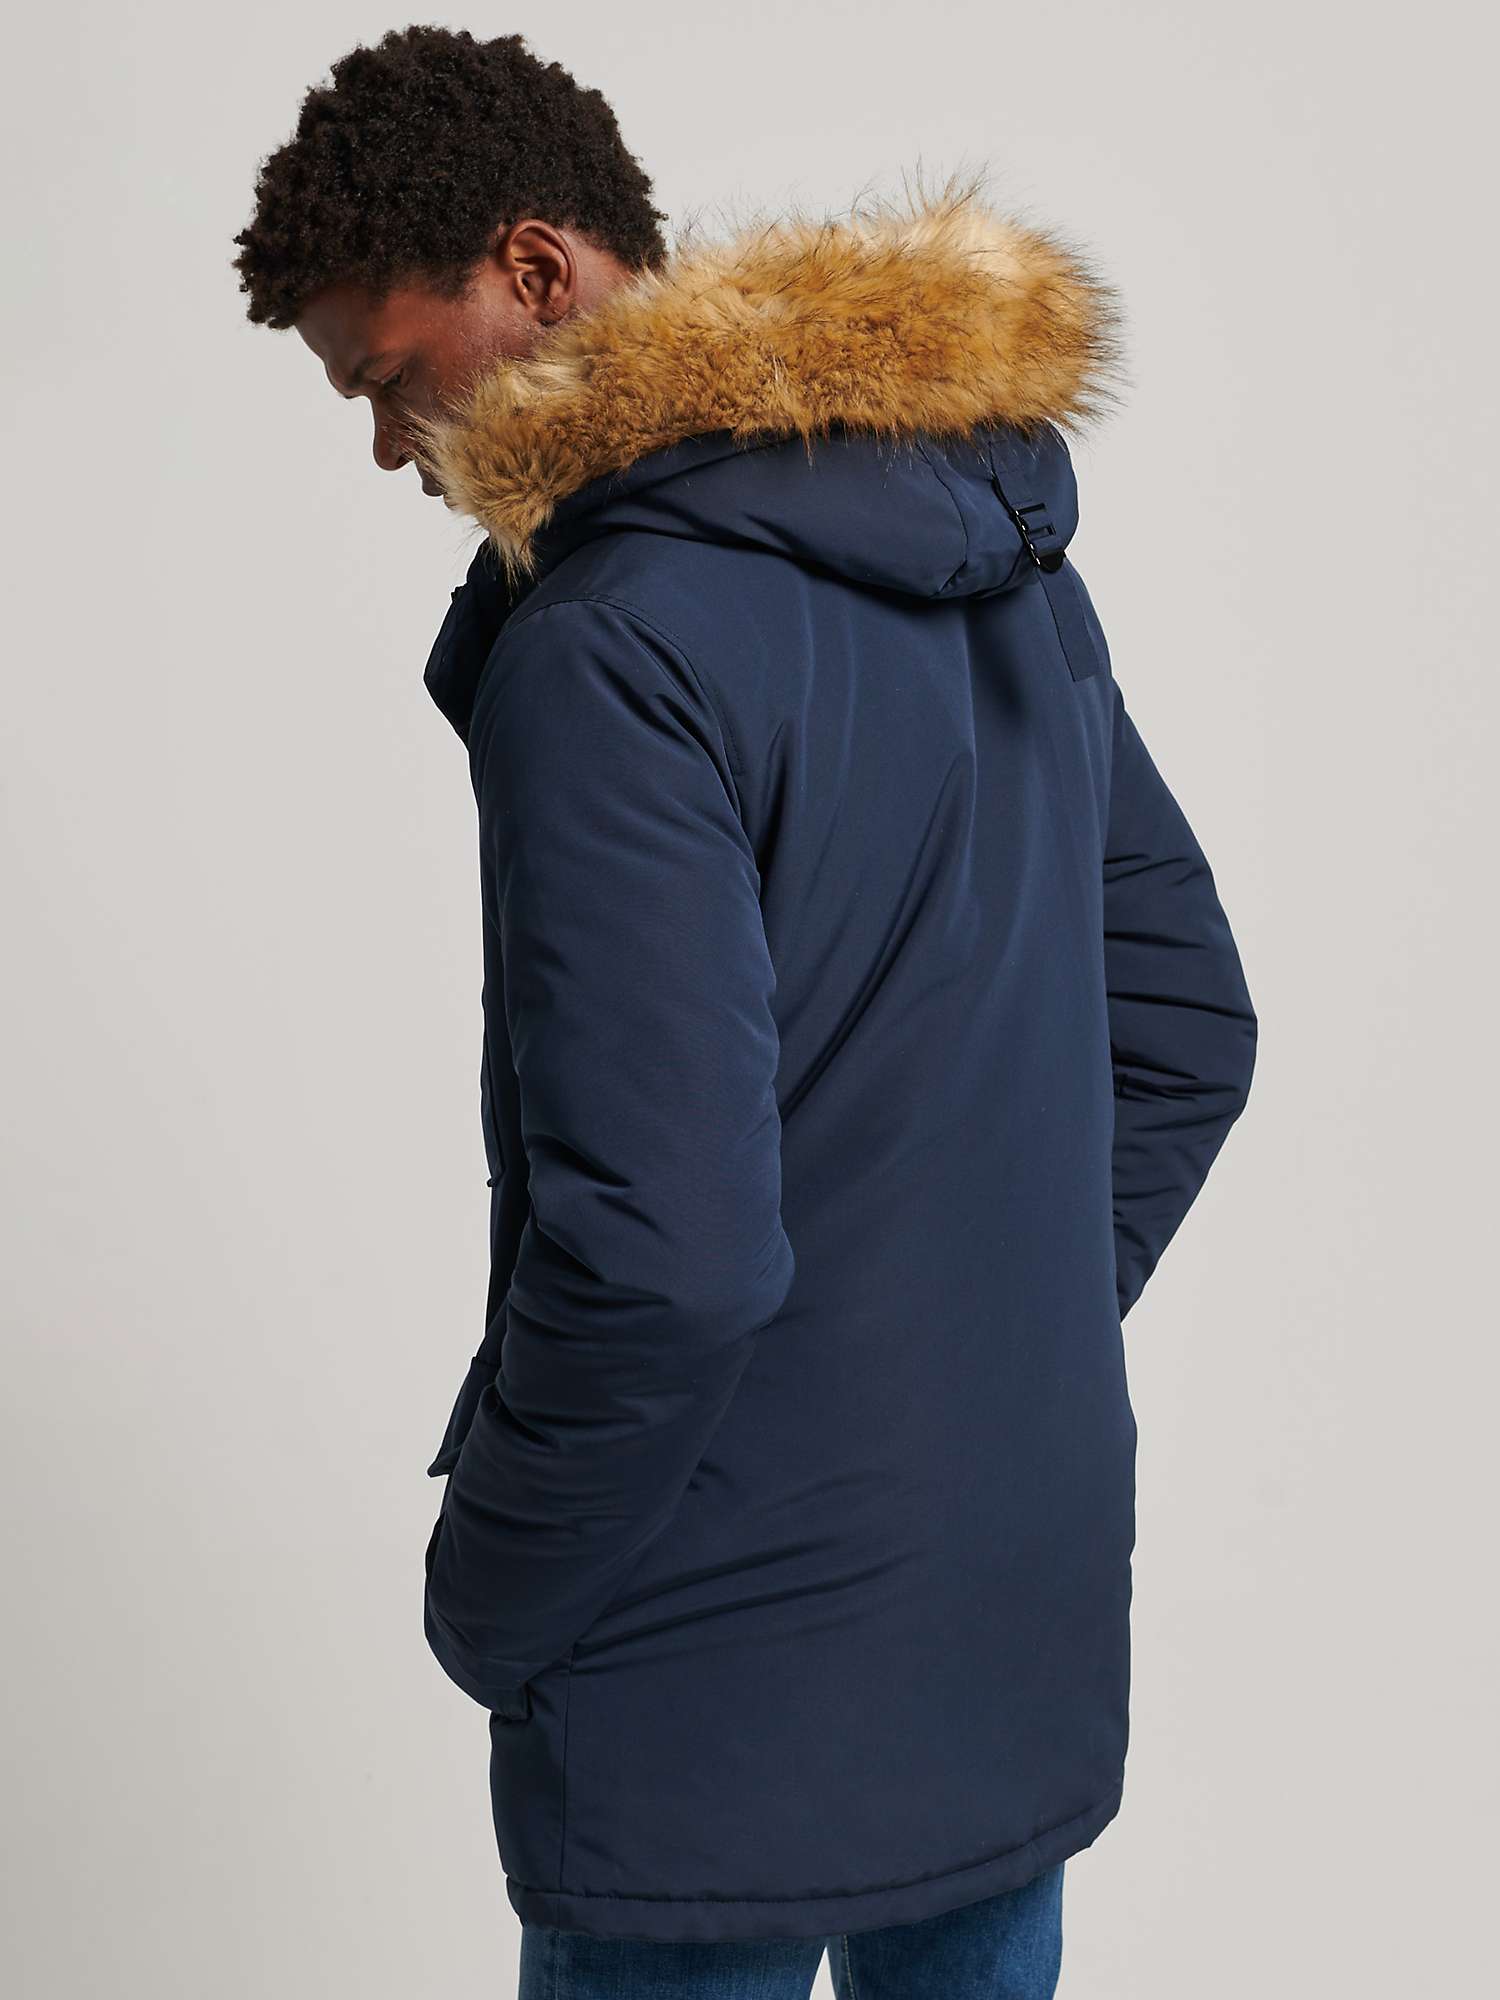 Chrome & Lewis John Partners Faux Parka, Superdry Navy Hooded at Fur Everest Nordic